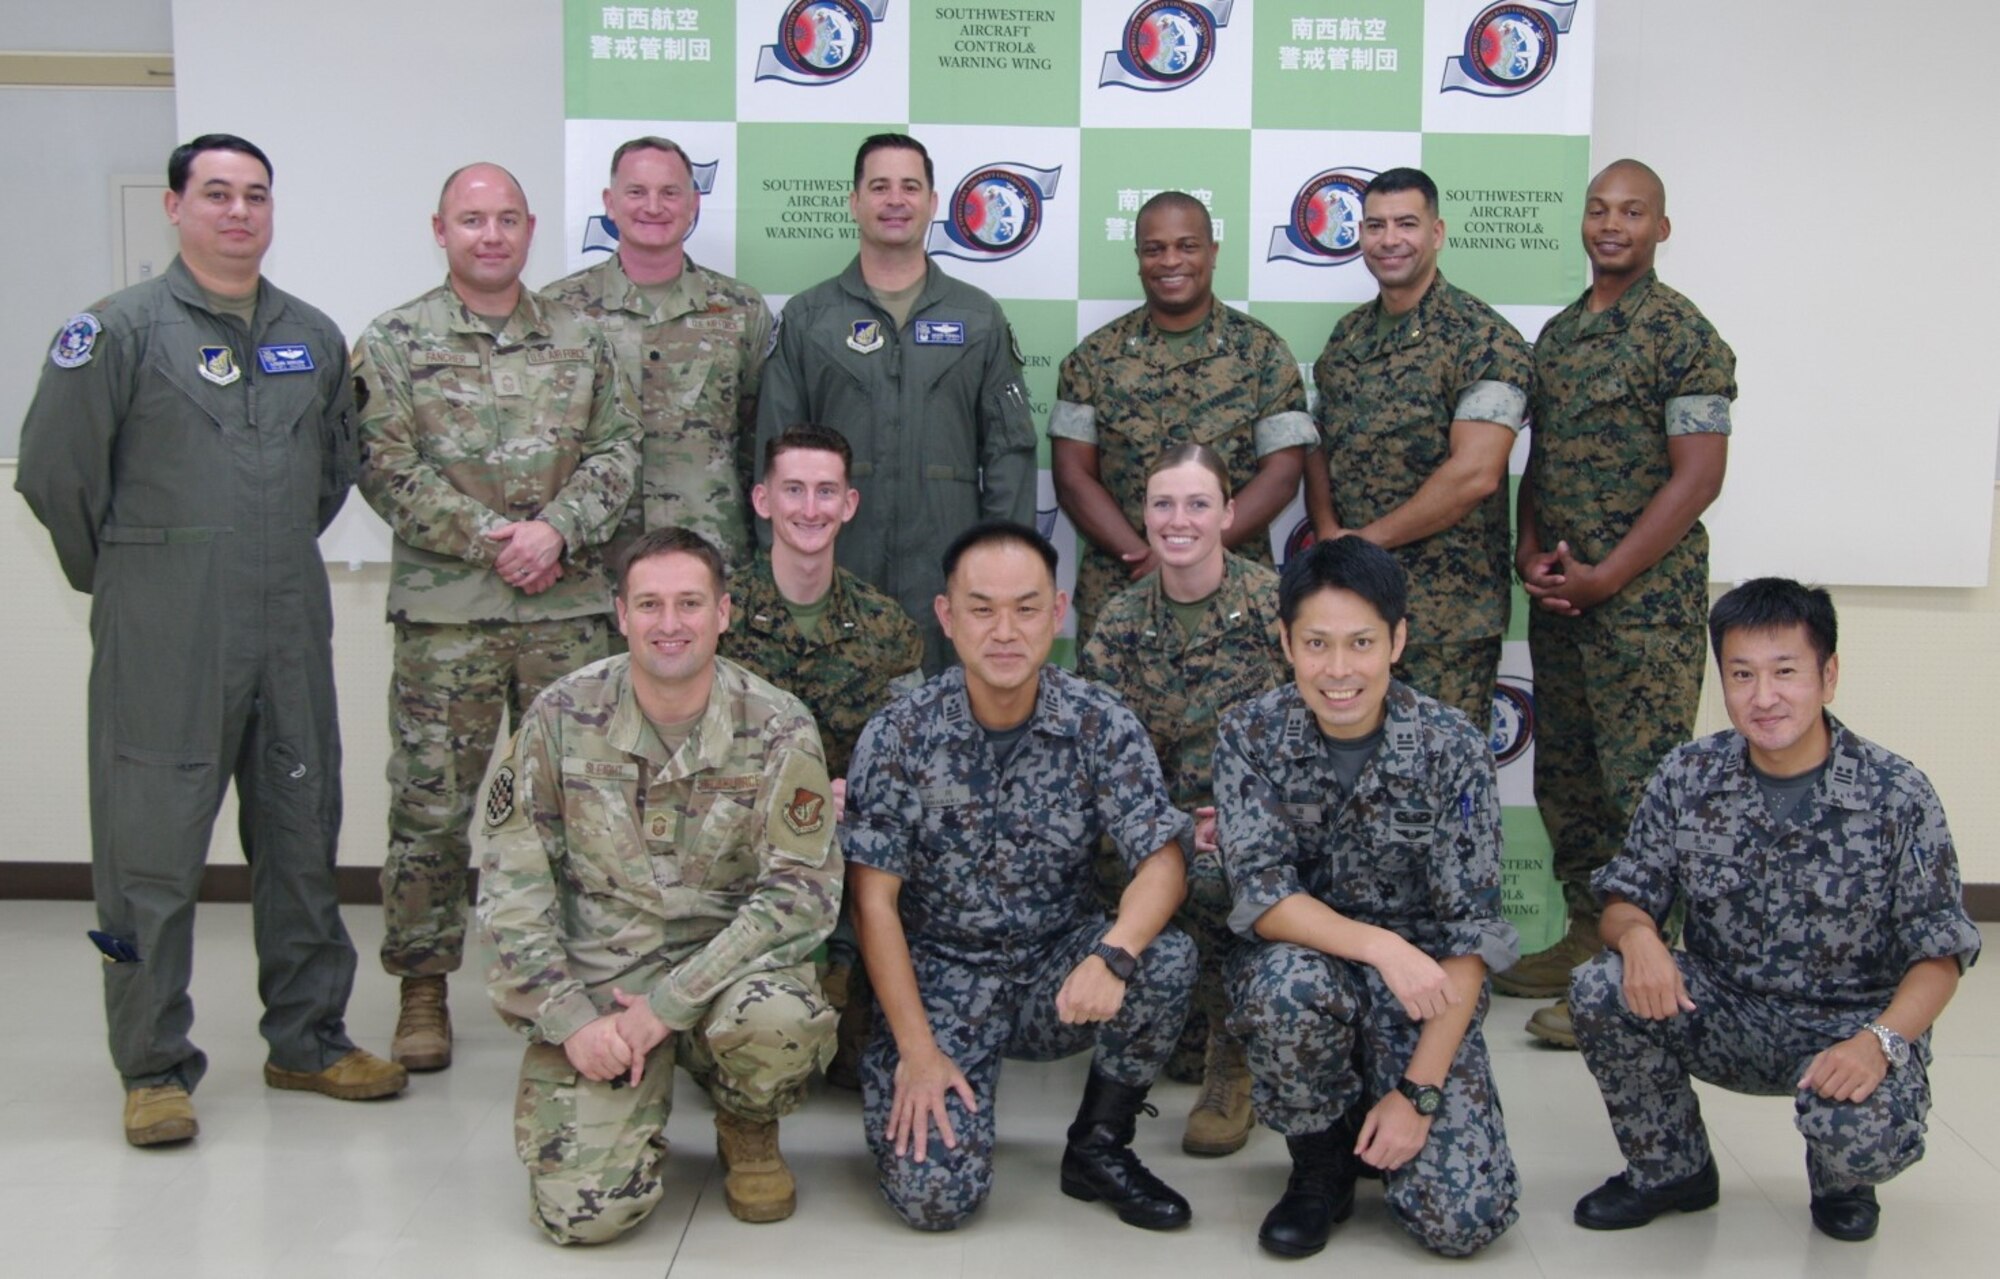 Airmen, Marines, and JASDF personnel pose for a picture.